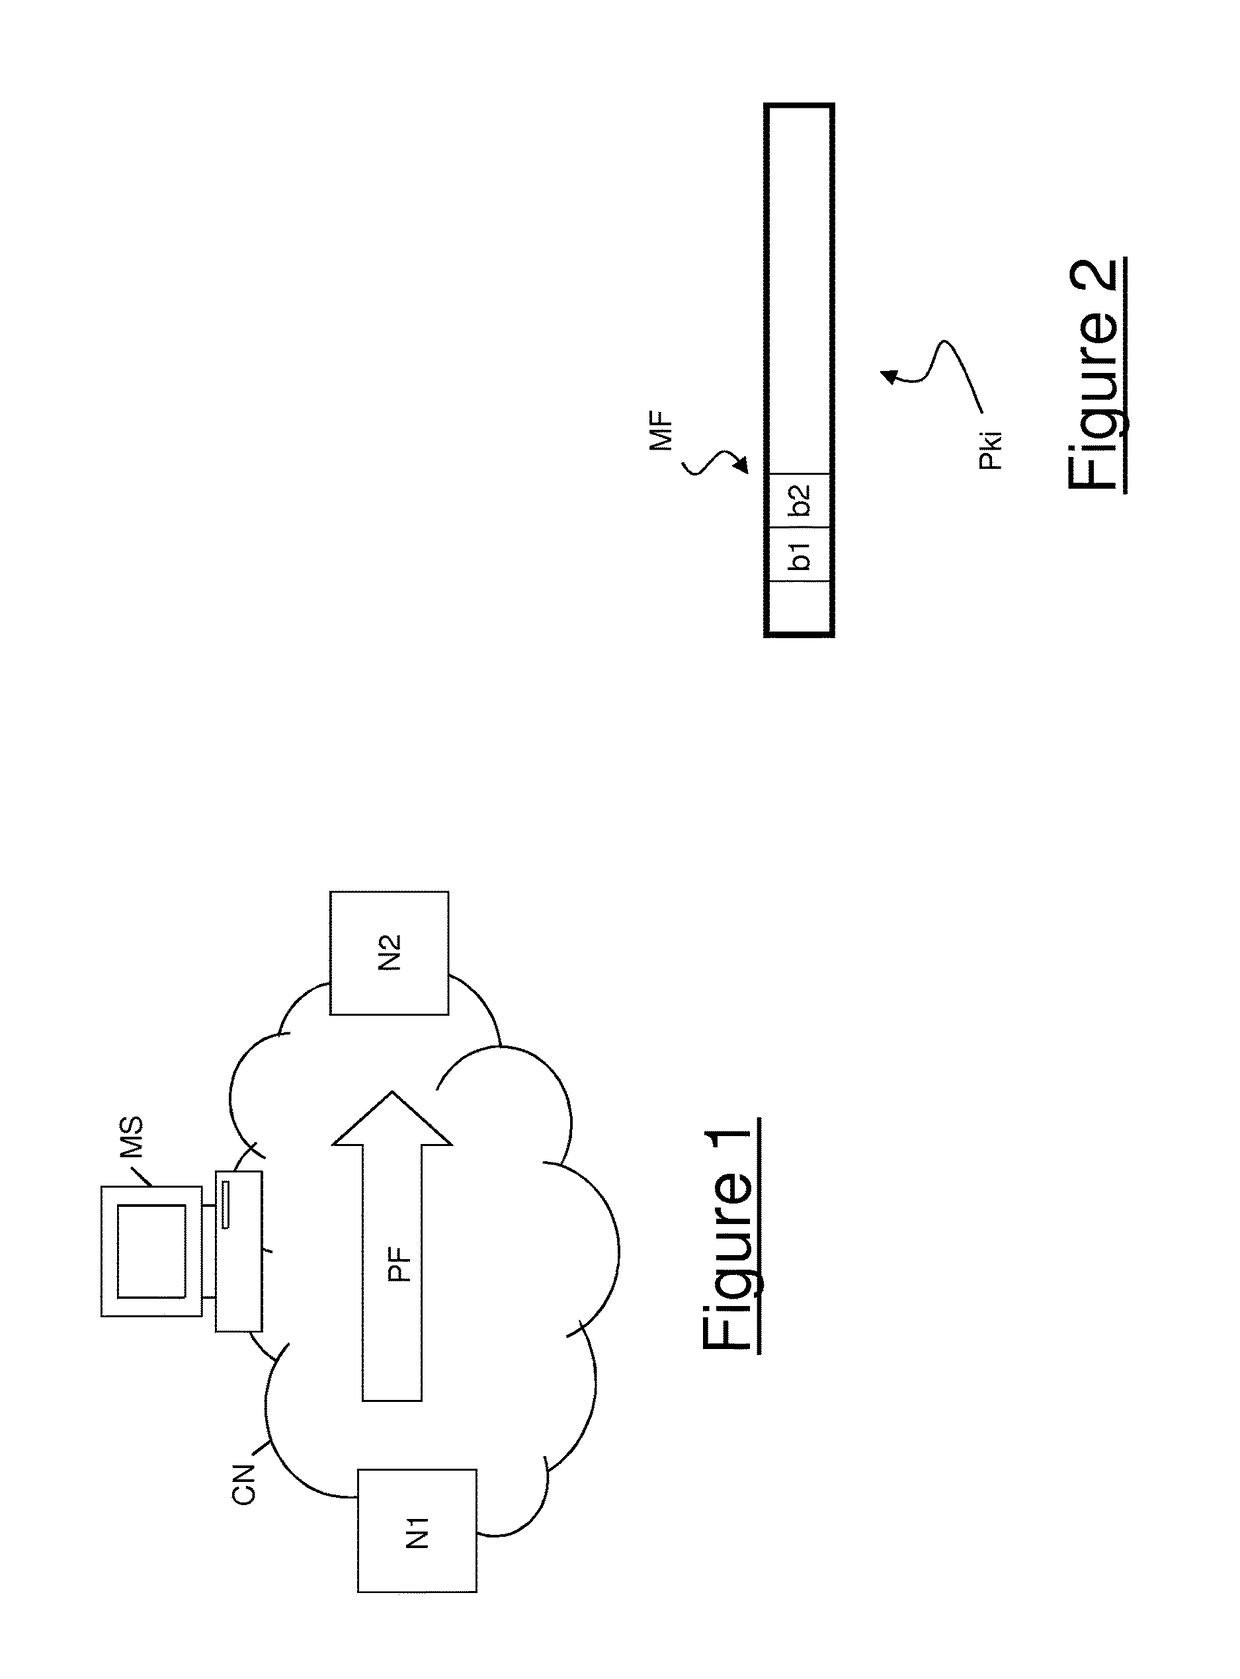 Time measurement in a packet-switched communication network